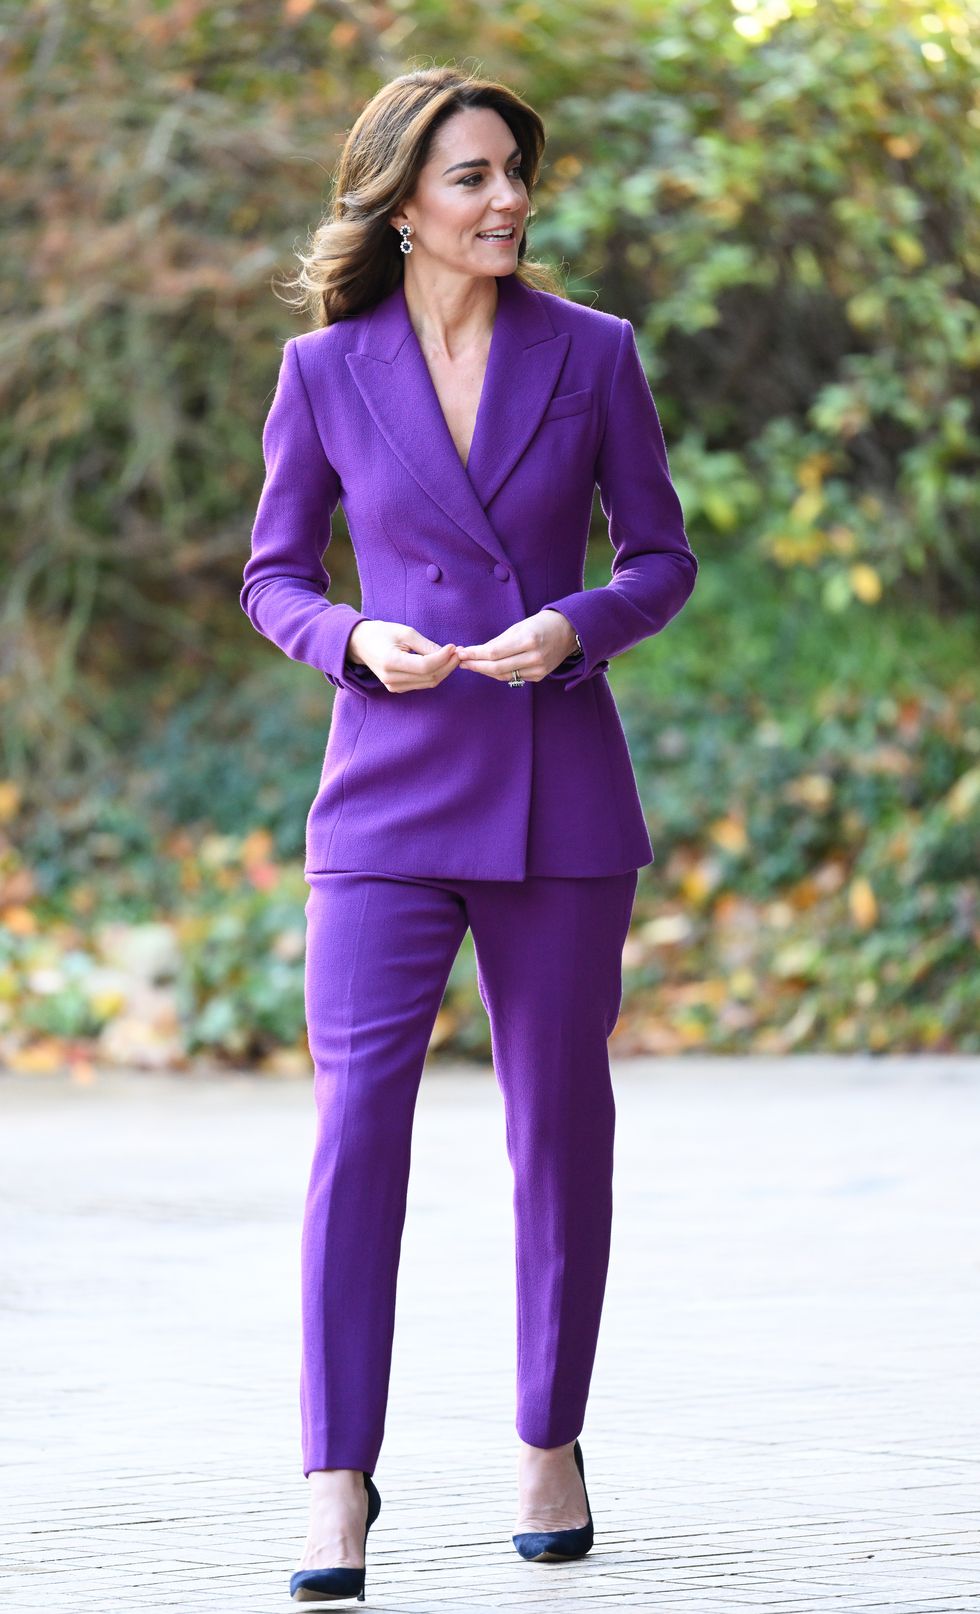 Kate Middleton Wears a Bold Purple Suit to Host an Event Close to Her Heart